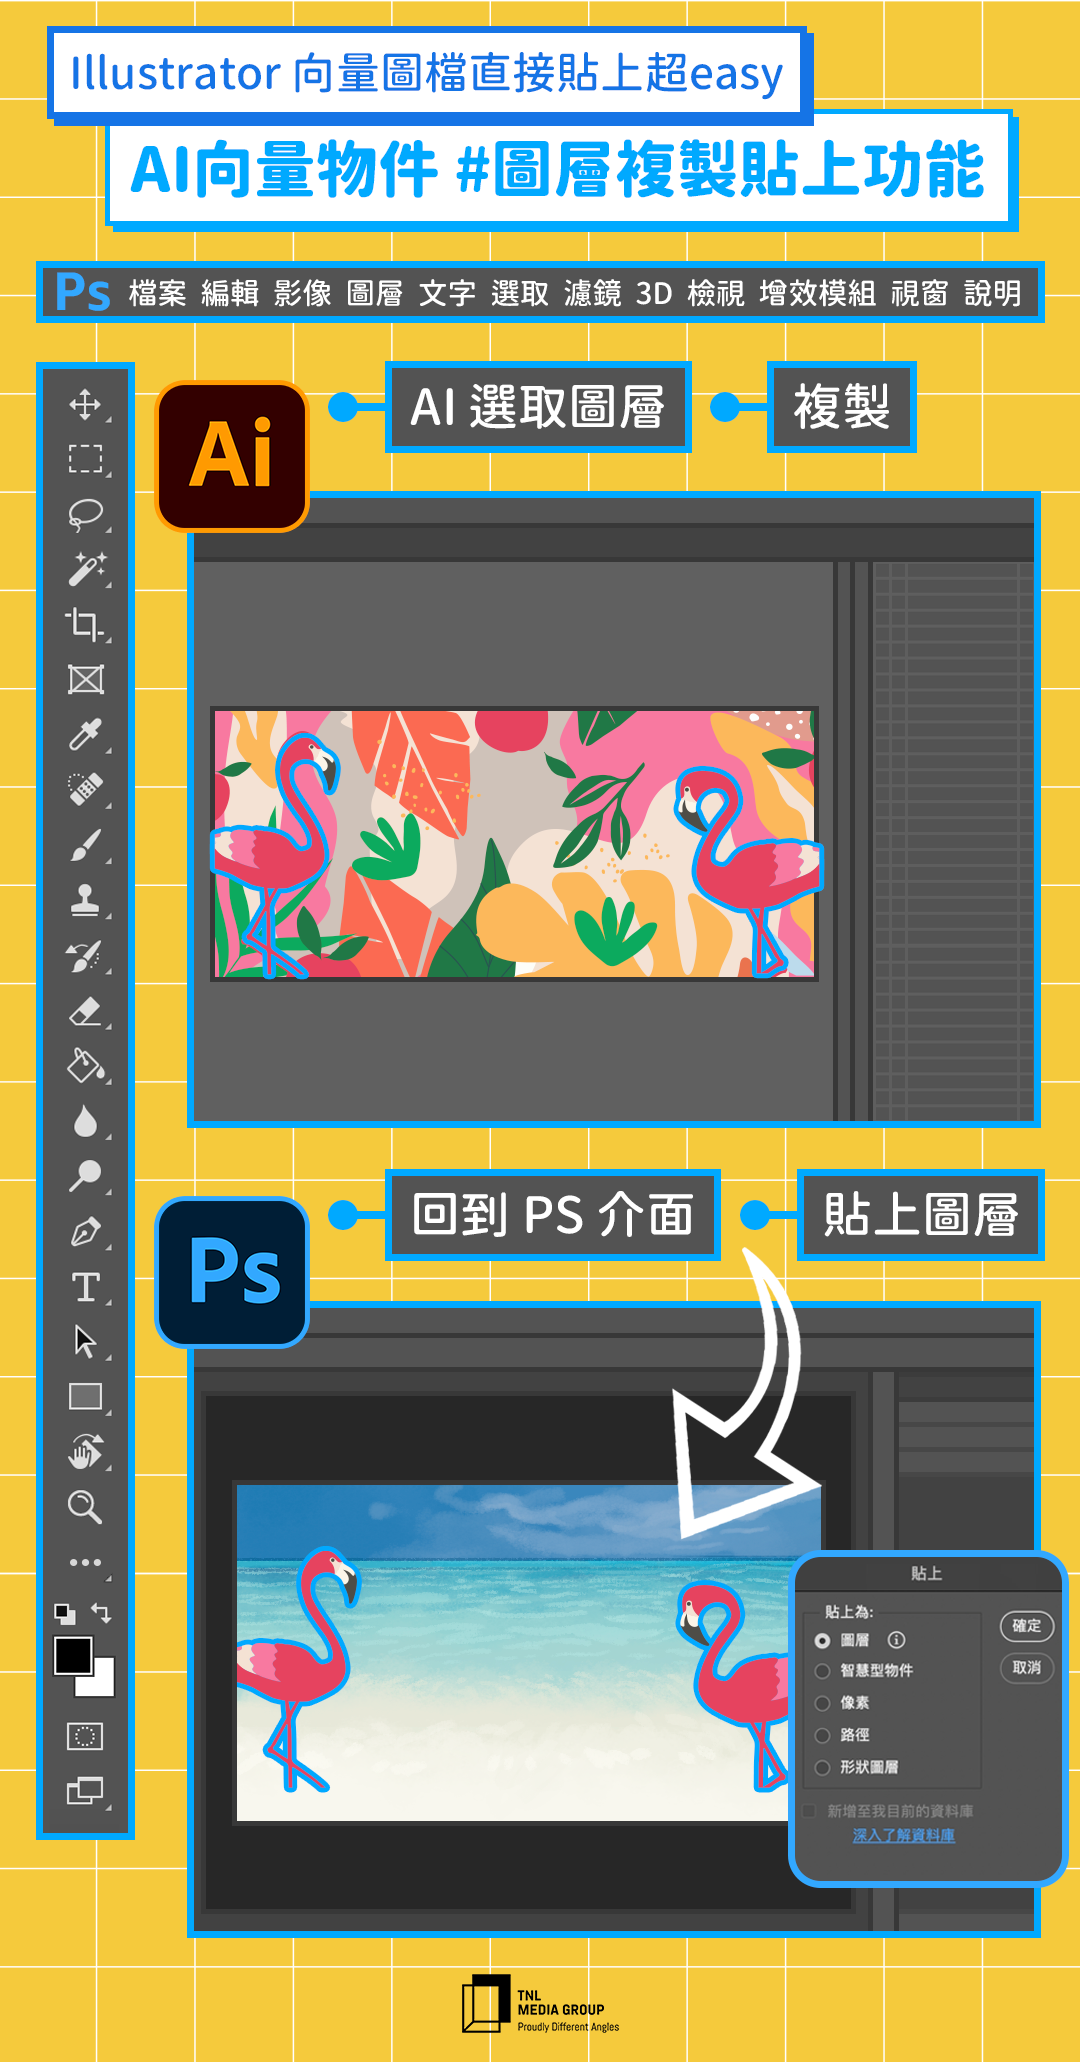 In the photo, it is mentioned that Illustrator vector image files can be directly pasted super easy, AI vector objects # layer copy and paste function, Ps file editing image layer text selection filter 3D viewing plug-in module window description, including games, digital display advertising, font, software, text